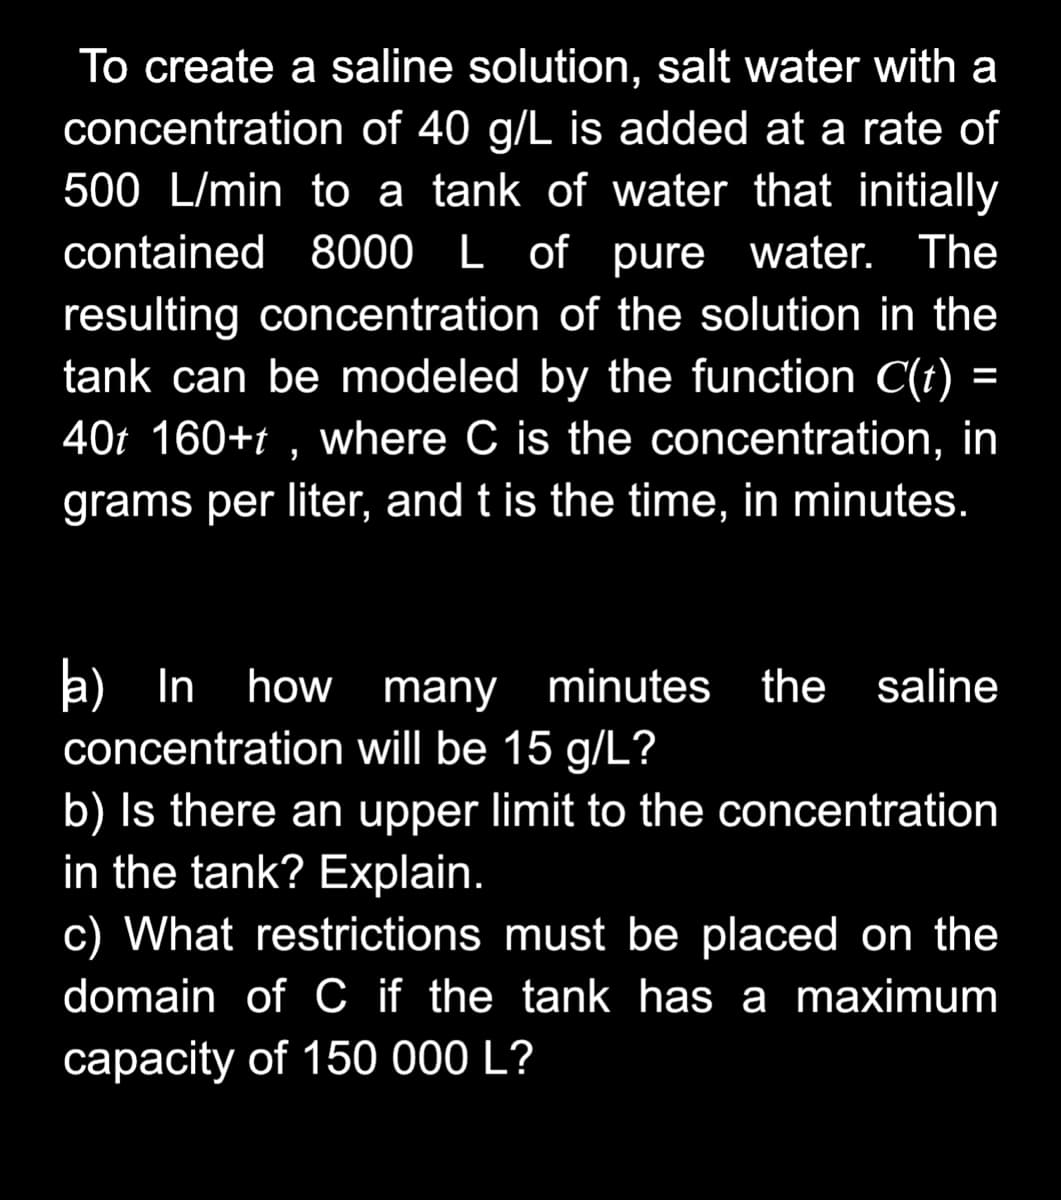 To create a saline solution, salt water with a
concentration of 40 g/L is added at a rate of
500 L/min to a tank of water that initially
contained 8000 L of pure water. The
resulting concentration of the solution in the
tank can be modeled by the function C(t) =
40t 160+t , where C is the concentration, in
%3D
grams per liter, and t is the time, in minutes.
a) In
concentration will be 15 g/L?
b) Is there an upper limit to the concentration
in the tank? Explain.
how many
minutes the saline
c) What restrictions must be placed on the
domain of C if the tank has a maximum
capacity of 150 000 L?
